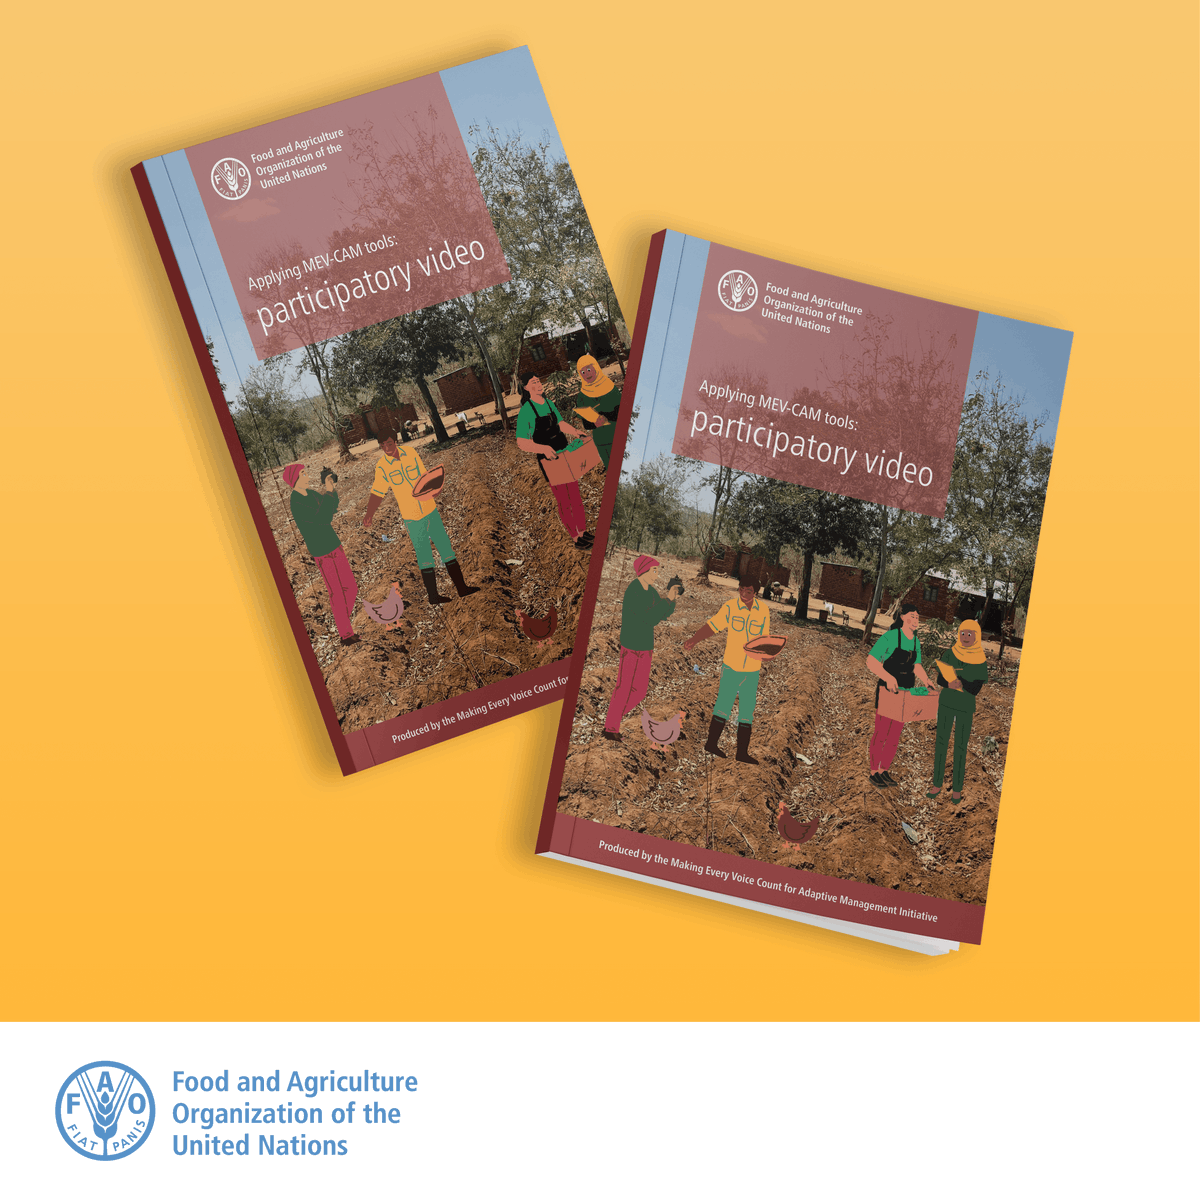 Download a free @FAO publication on how to use participatory video, an innovative community-led technique to improve sustainability in dryland forests and agrosilvopastoral systems. 👉ow.ly/4NP450QwGr0 #DrylandForests #MEV-CAM